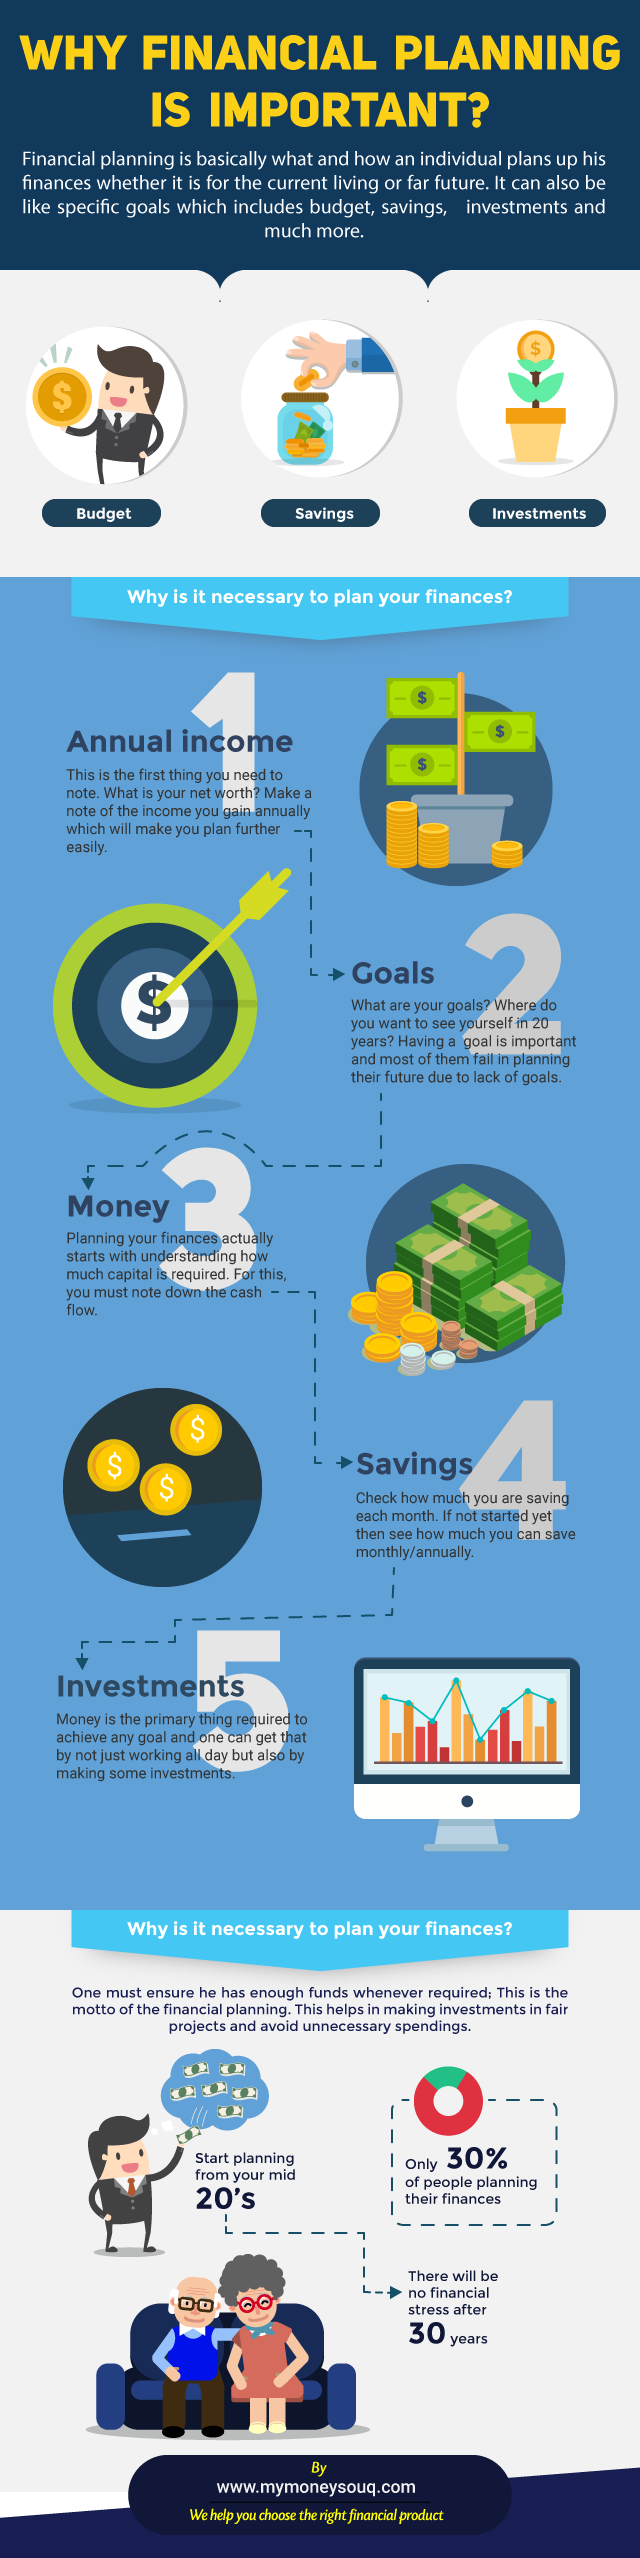 Why financial planning is important? - MyMoneySouq Financial Blog